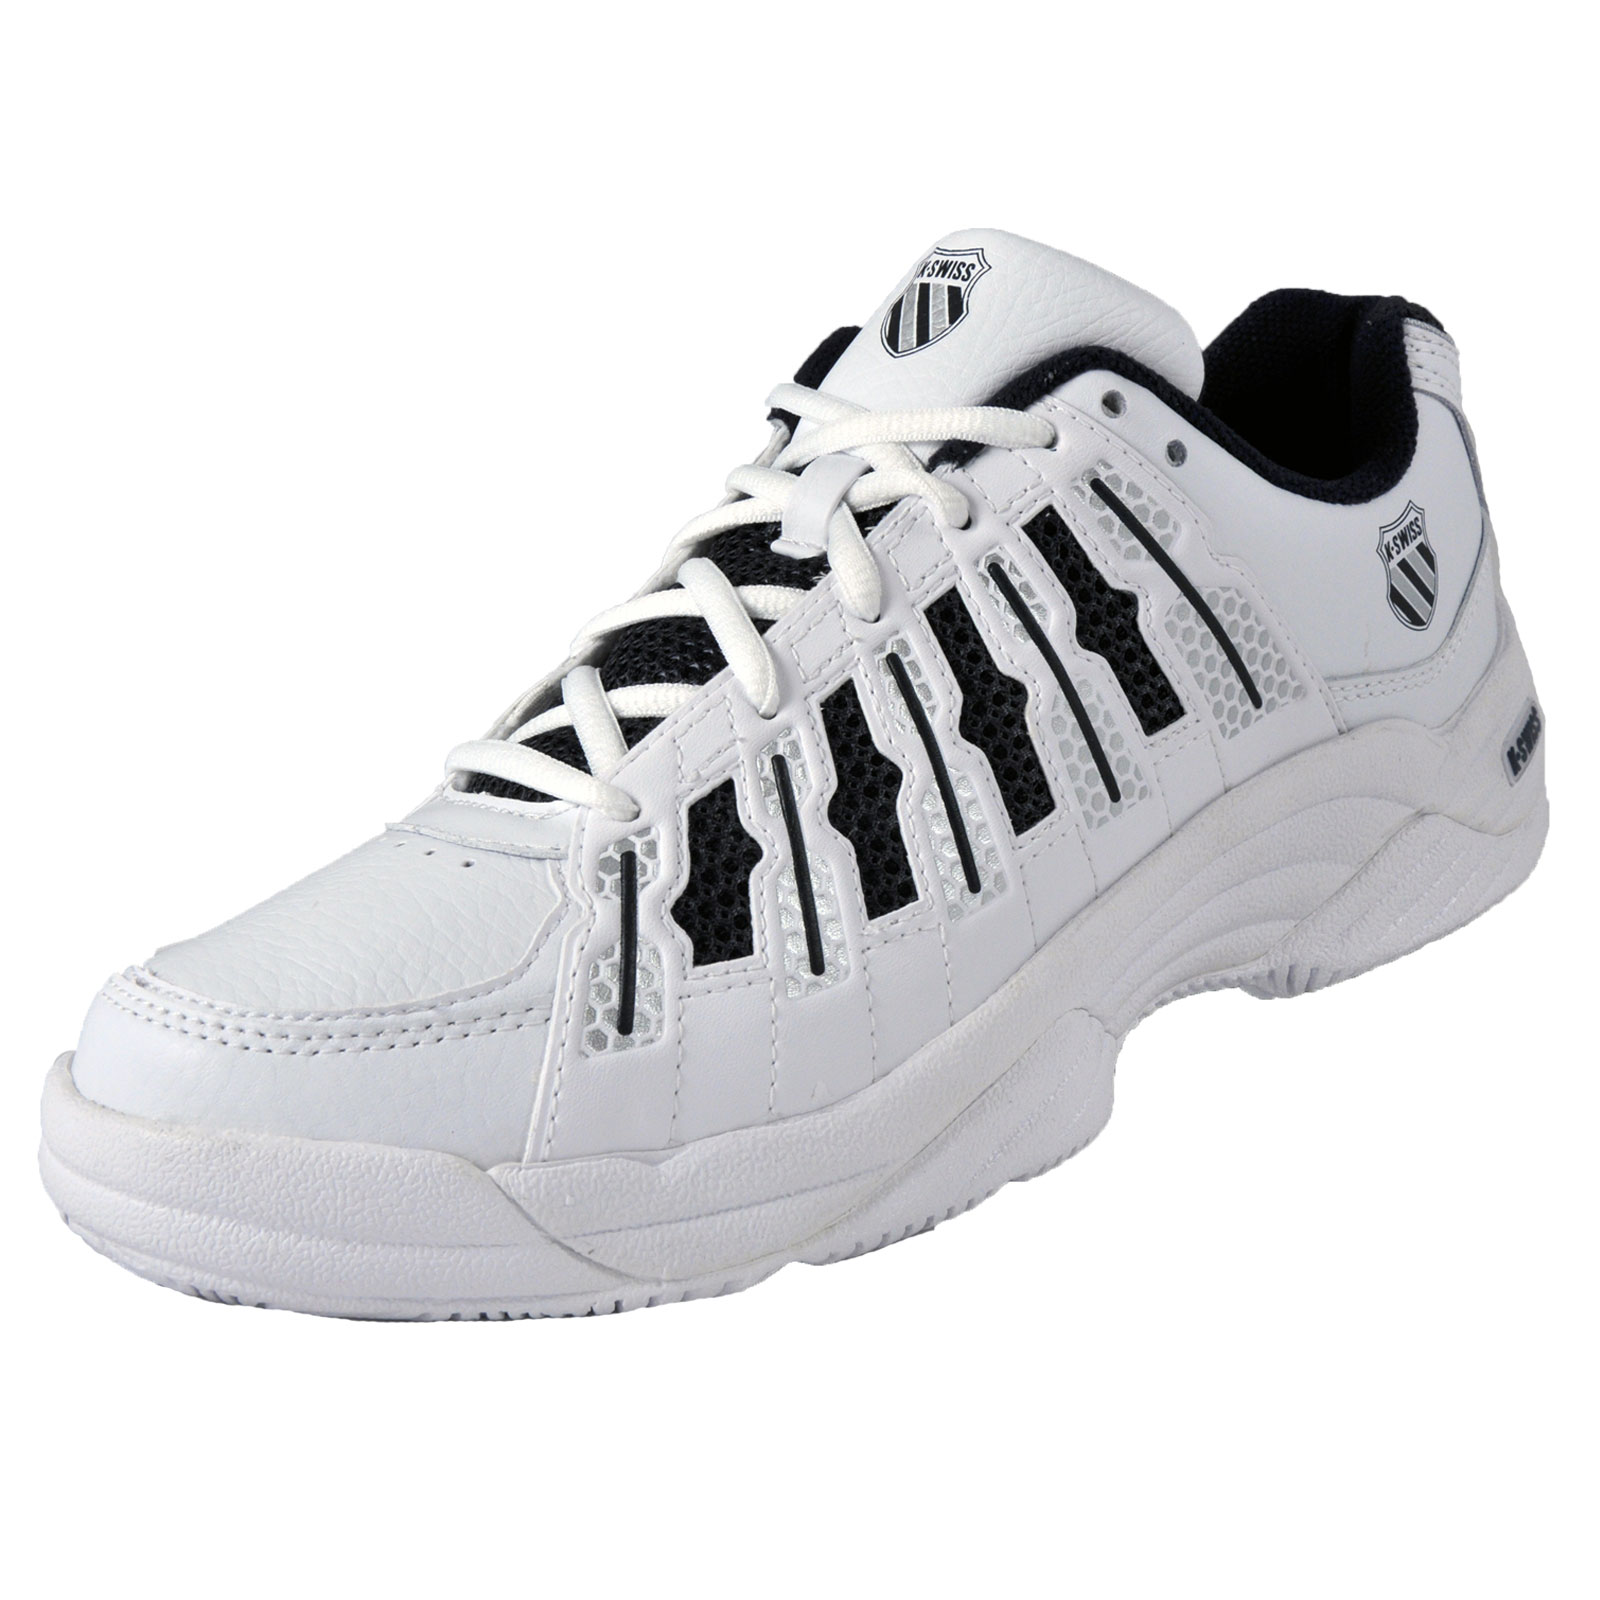 K Swiss Mens Leather Cross Training Shoes (Wht) * AUTHENTIC * | eBay